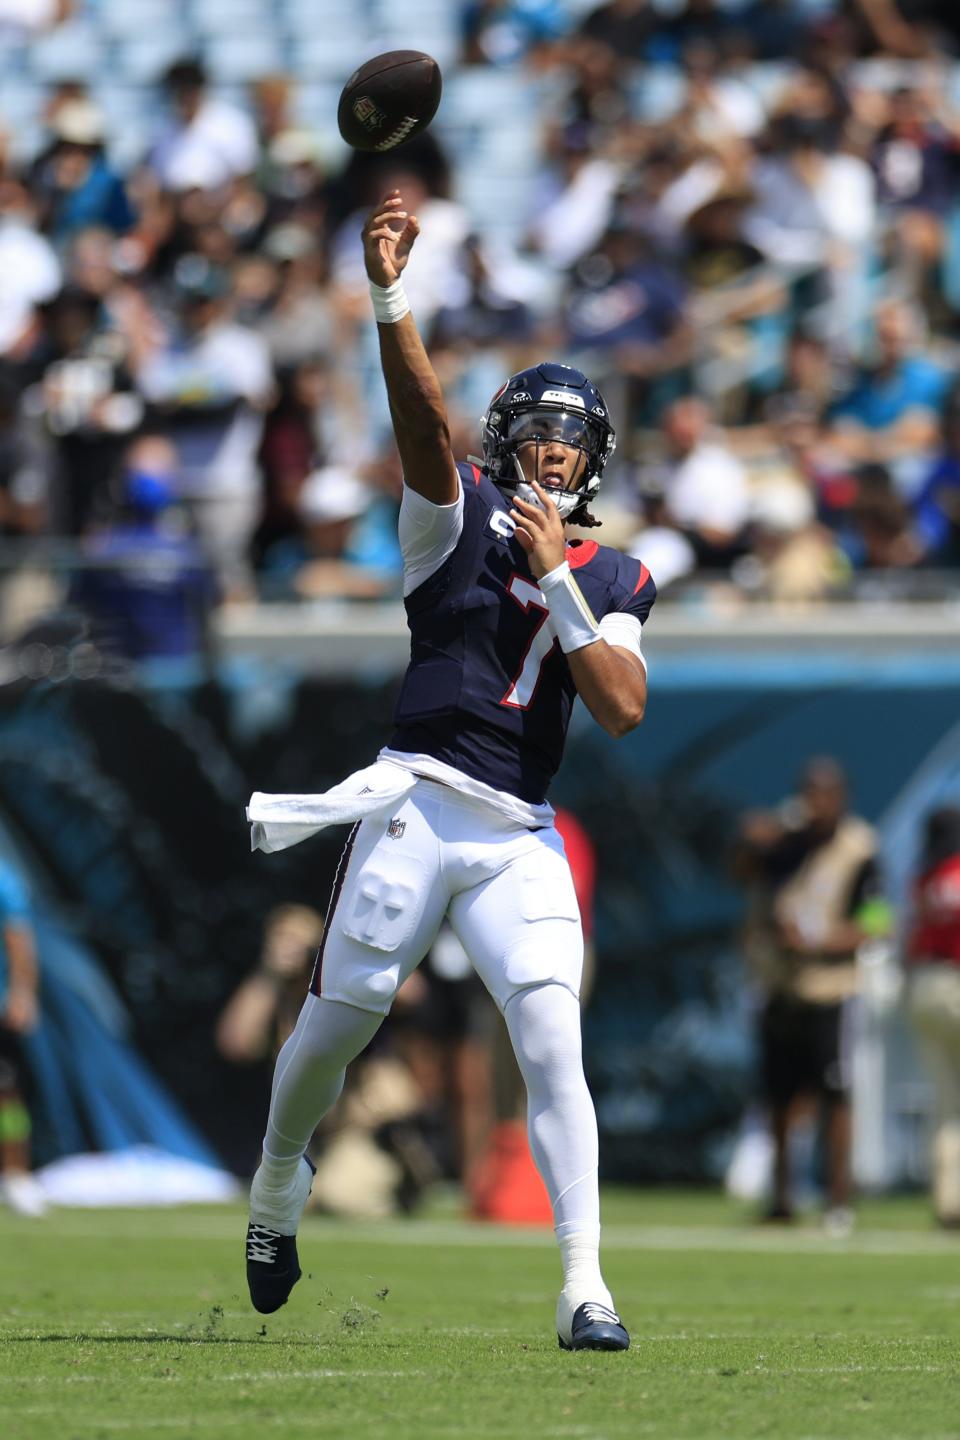 Houston Texans quarterback C.J. Stroud (7), seen here throwing a pass against the Jacksonville Jaguars in a 37-17 victory two months ago at EverBank Stadium, is have a phenomenal rookie year and might be looking at a long-term rivalry with Jaguars' QB Trevor Lawrence.